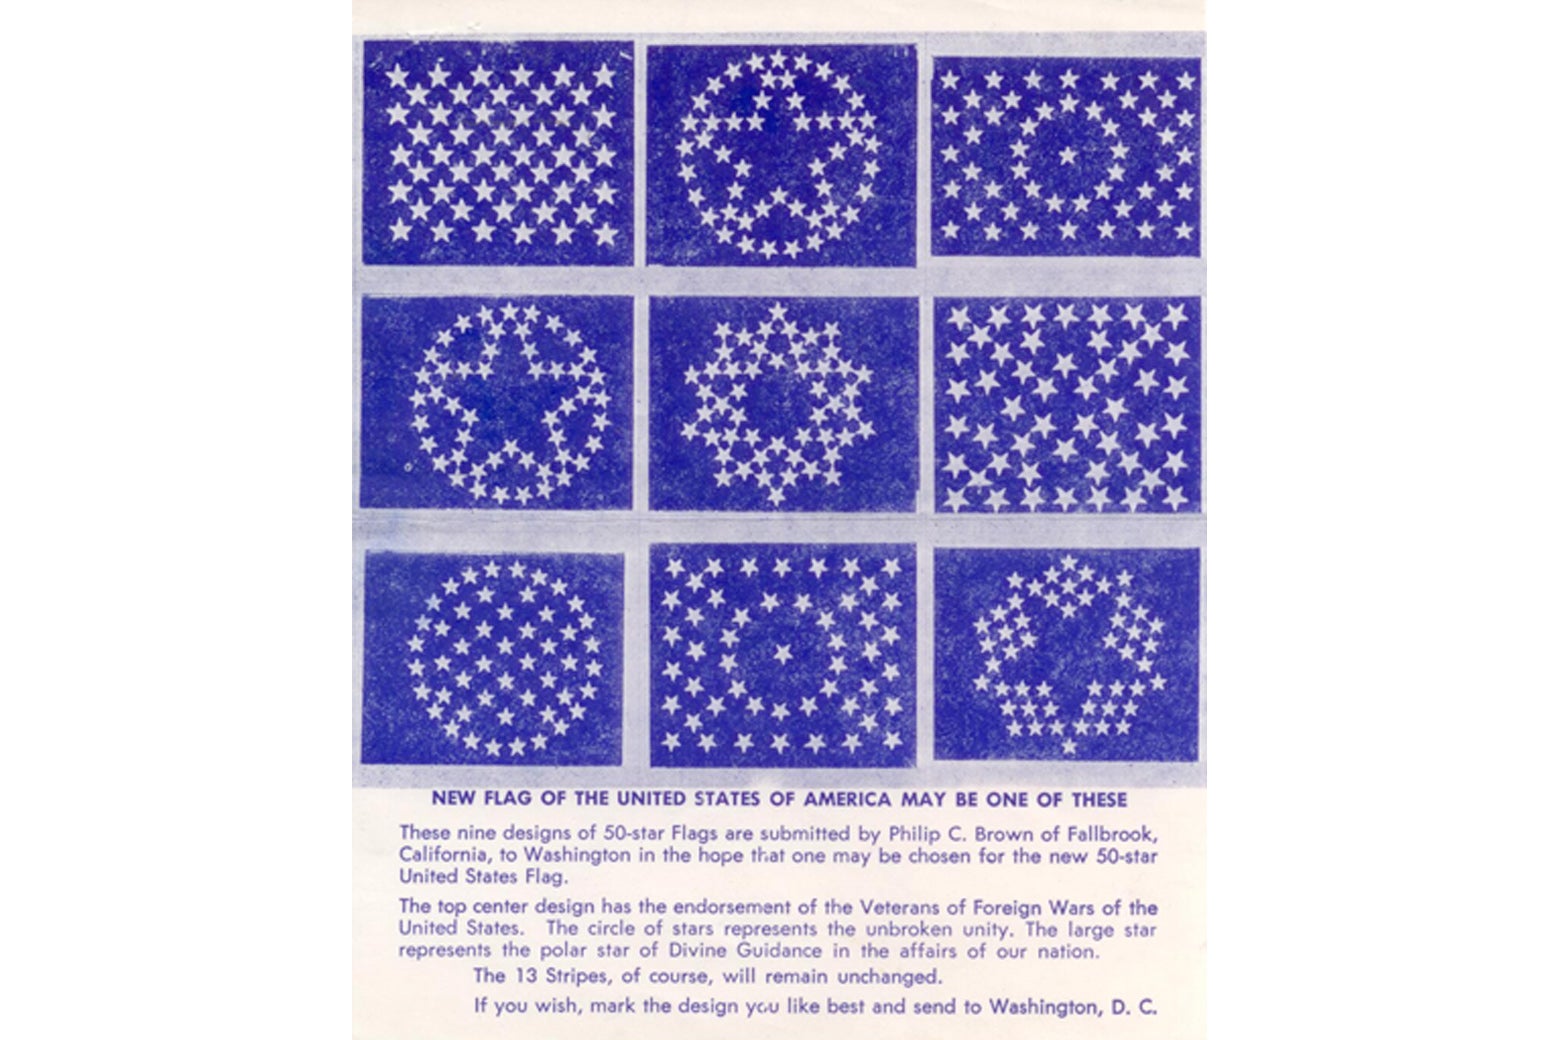 Nine possible arrangements of 50 stars on a blue background for the new flag.